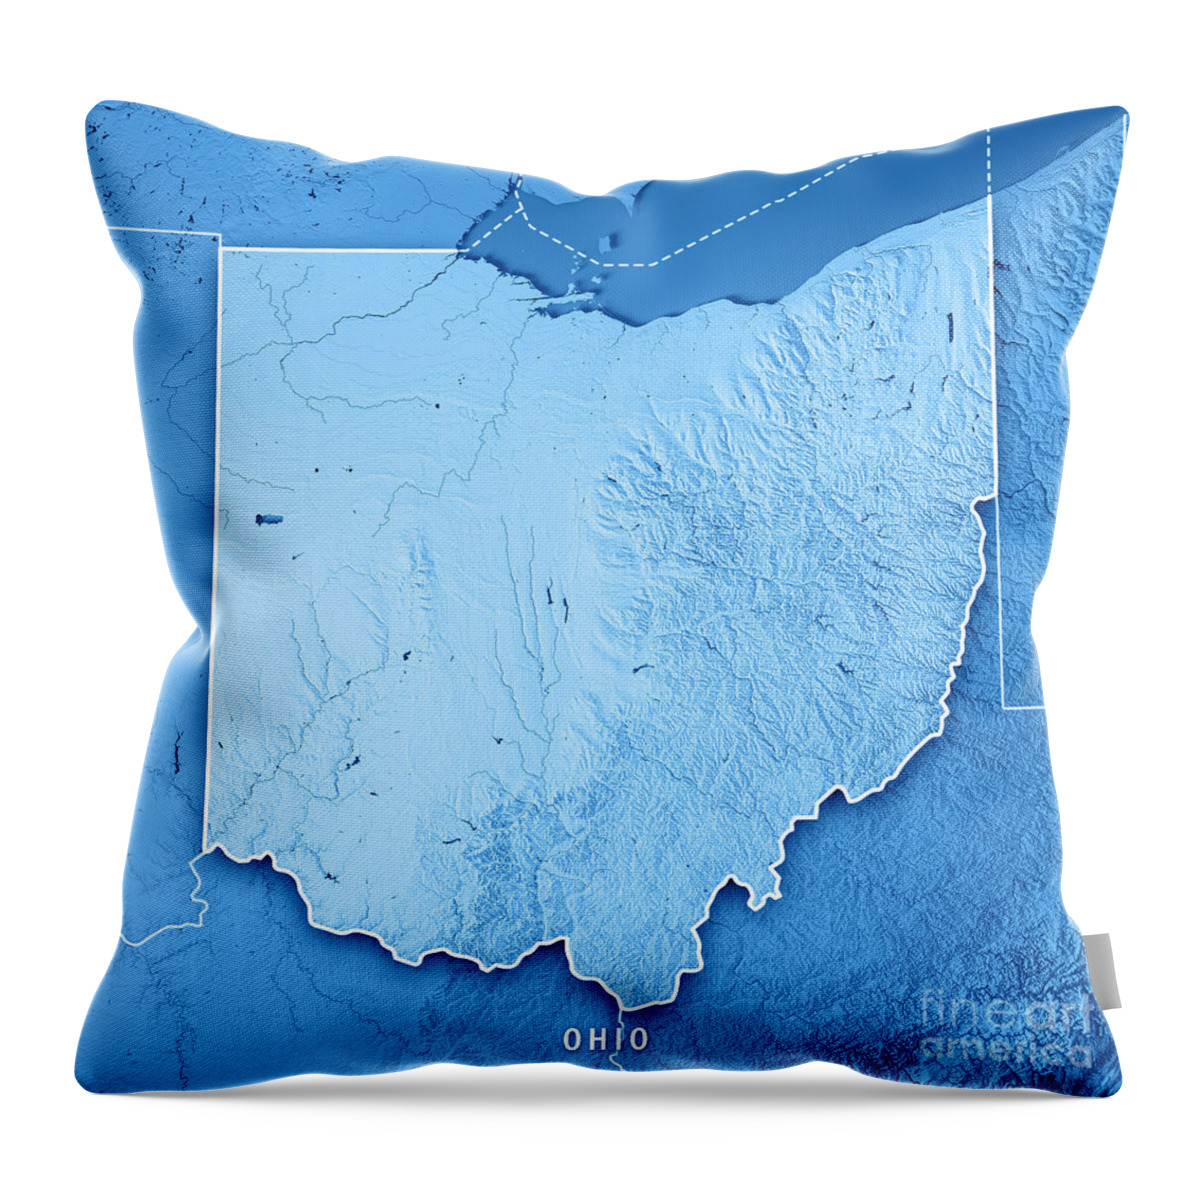 Ohio Throw Pillow featuring the digital art Ohio State USA 3D Render Topographic Map Blue Border by Frank Ramspott